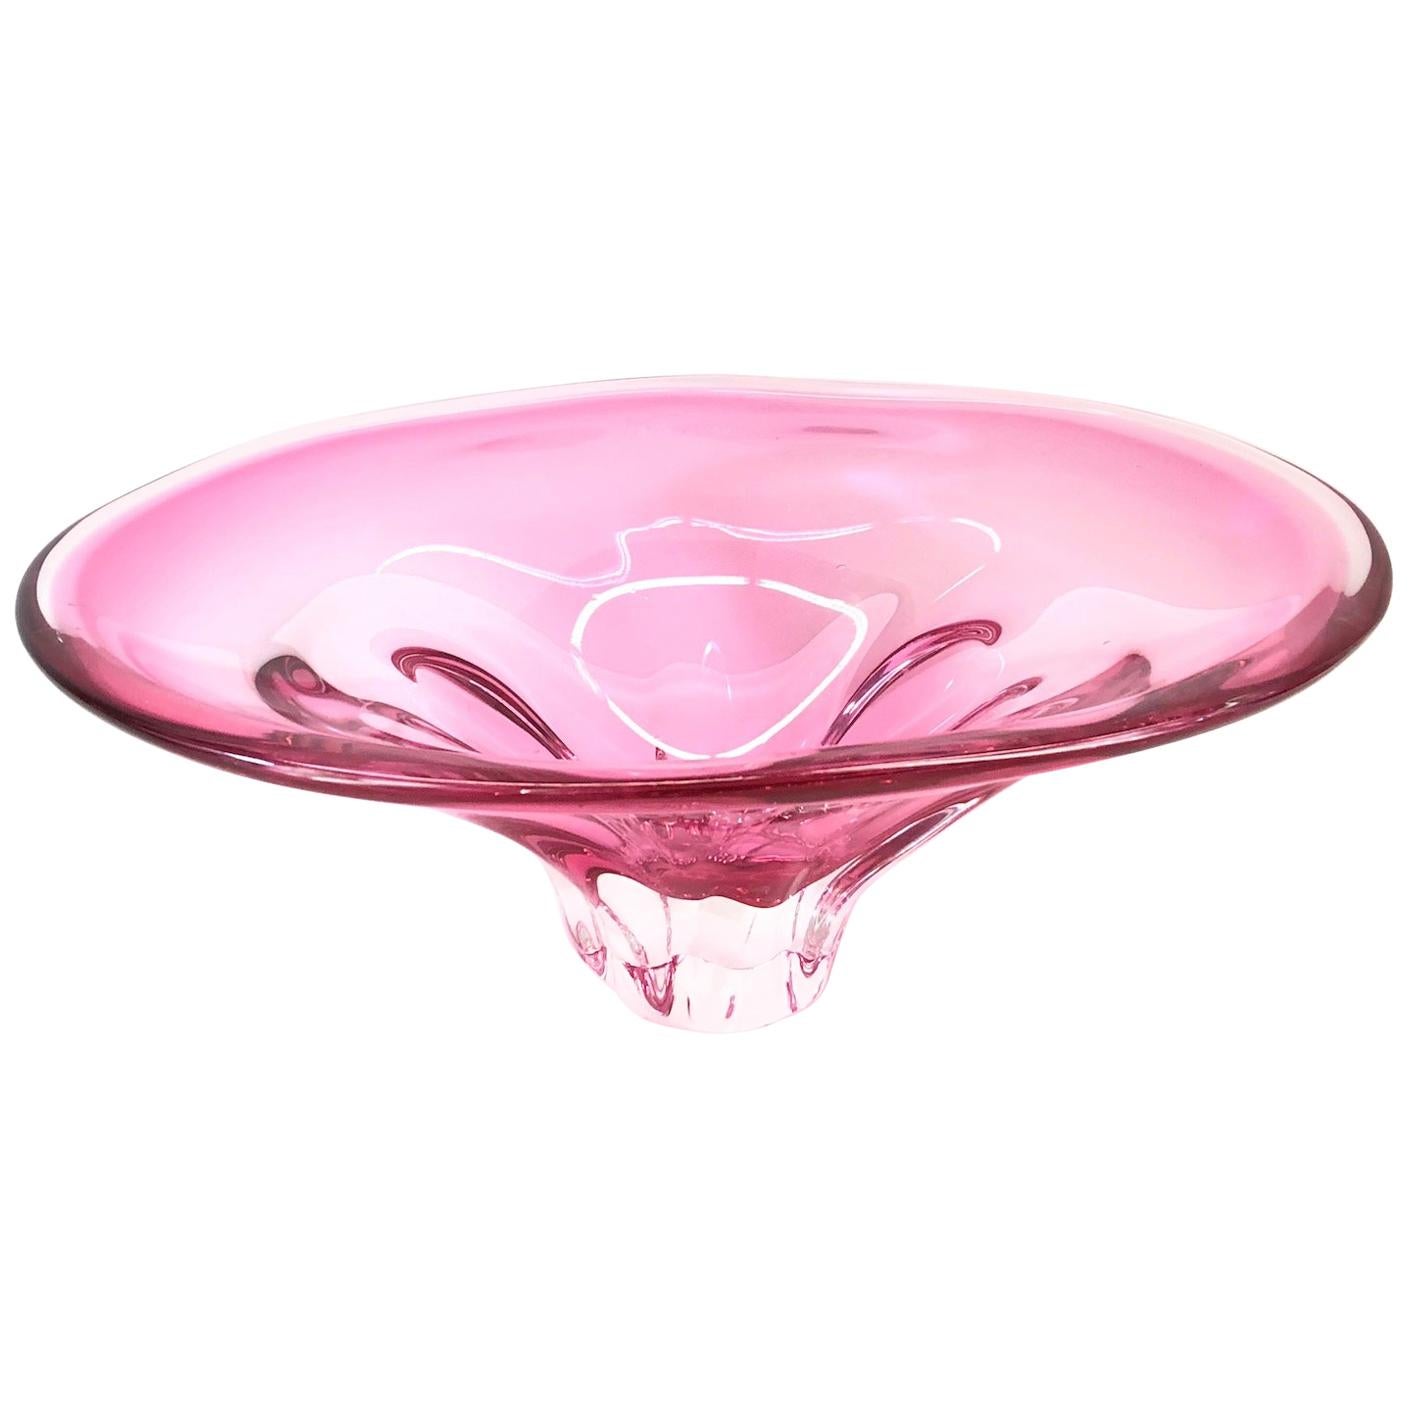 Gorgeous Murano Art Glass Sommerso Fruit Bowl Pink and Clear Vintage, Italy